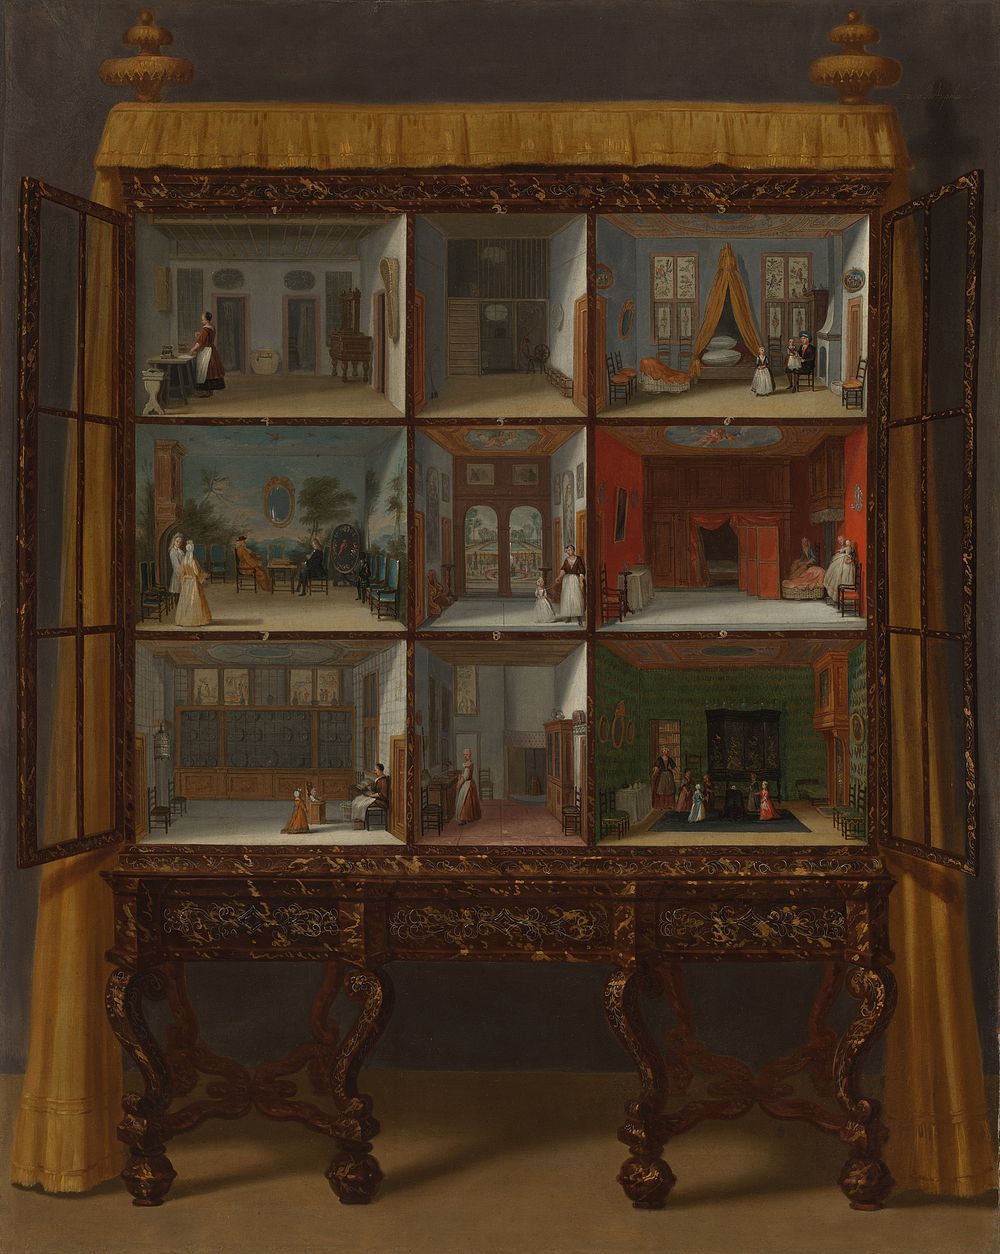 Dolls’ House of Petronella Oortman (c. 1710) by Jacob Appel I